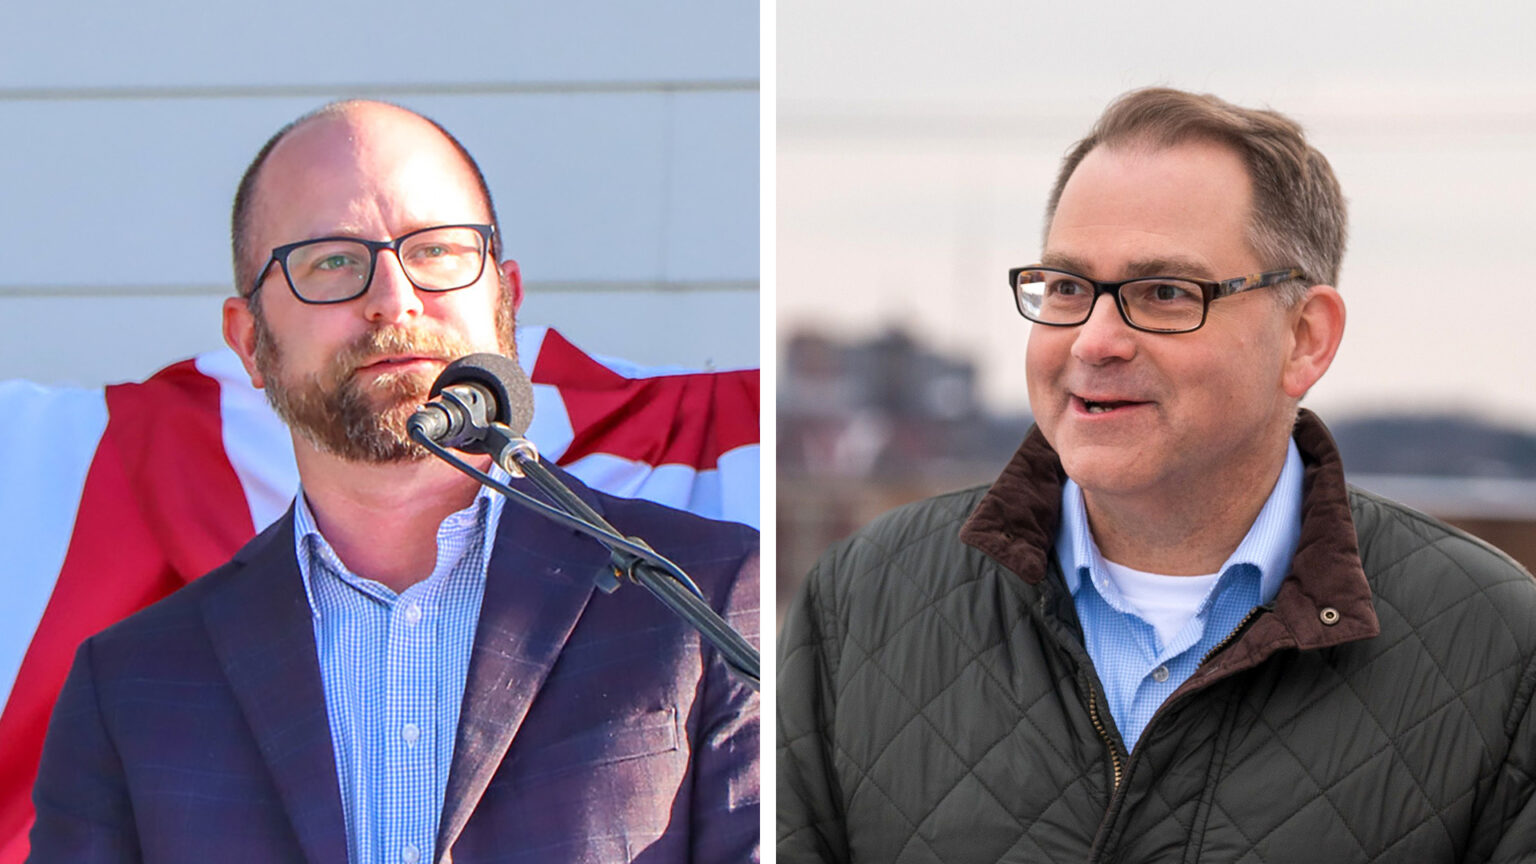 Side-by-side images show Eric Genrich and Chad Weininger standing outside in different locations.